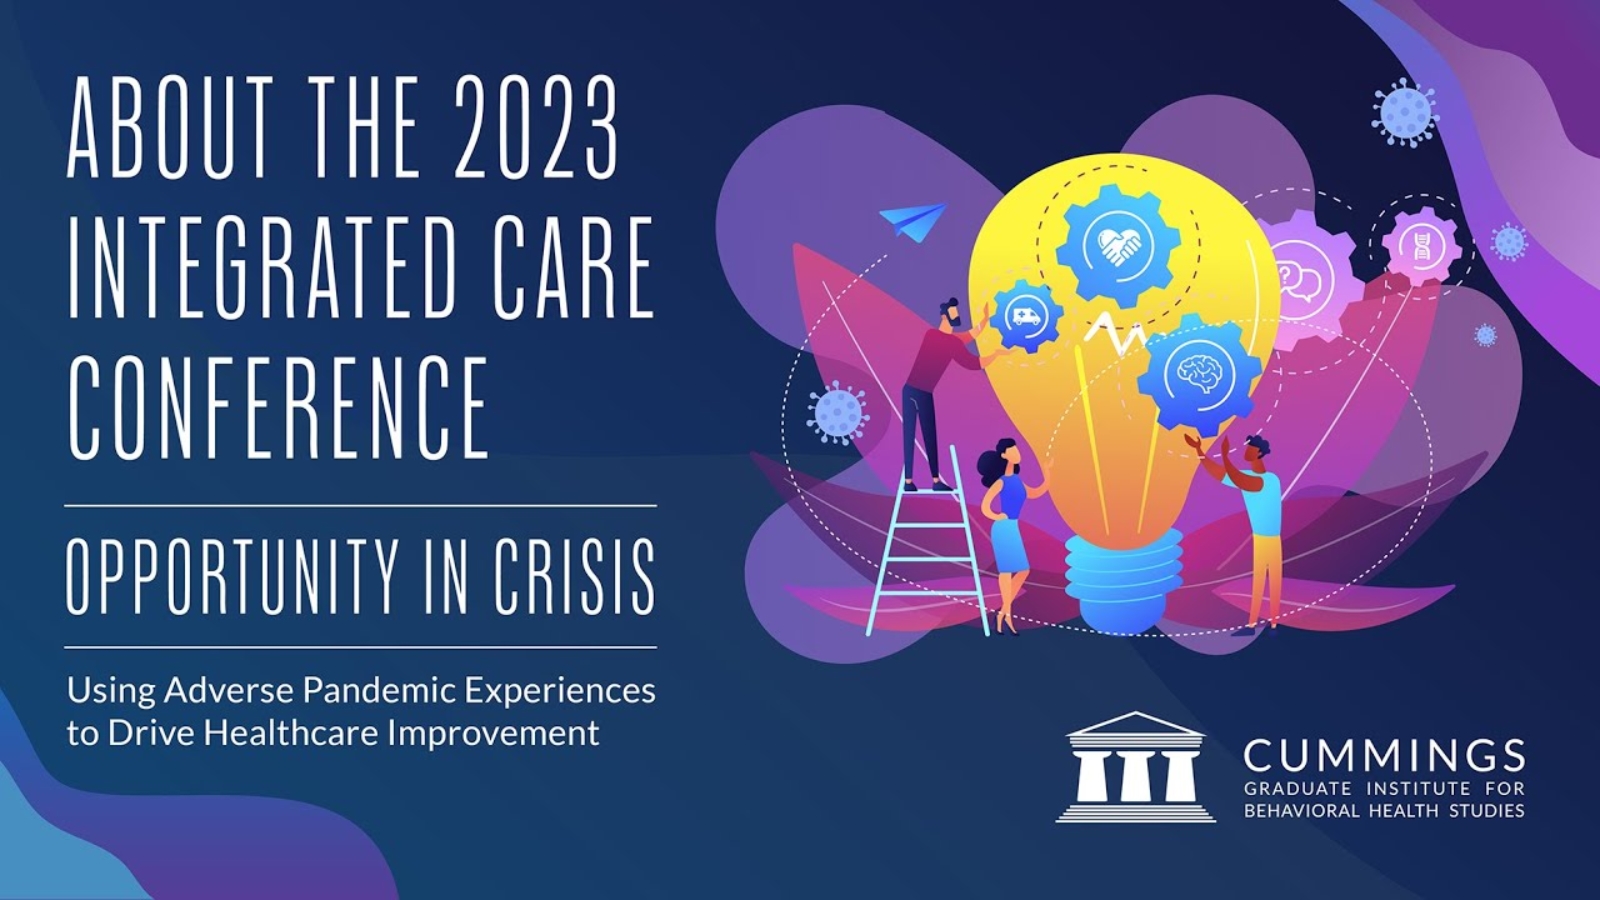 About the 2023 Integrated Care Conference